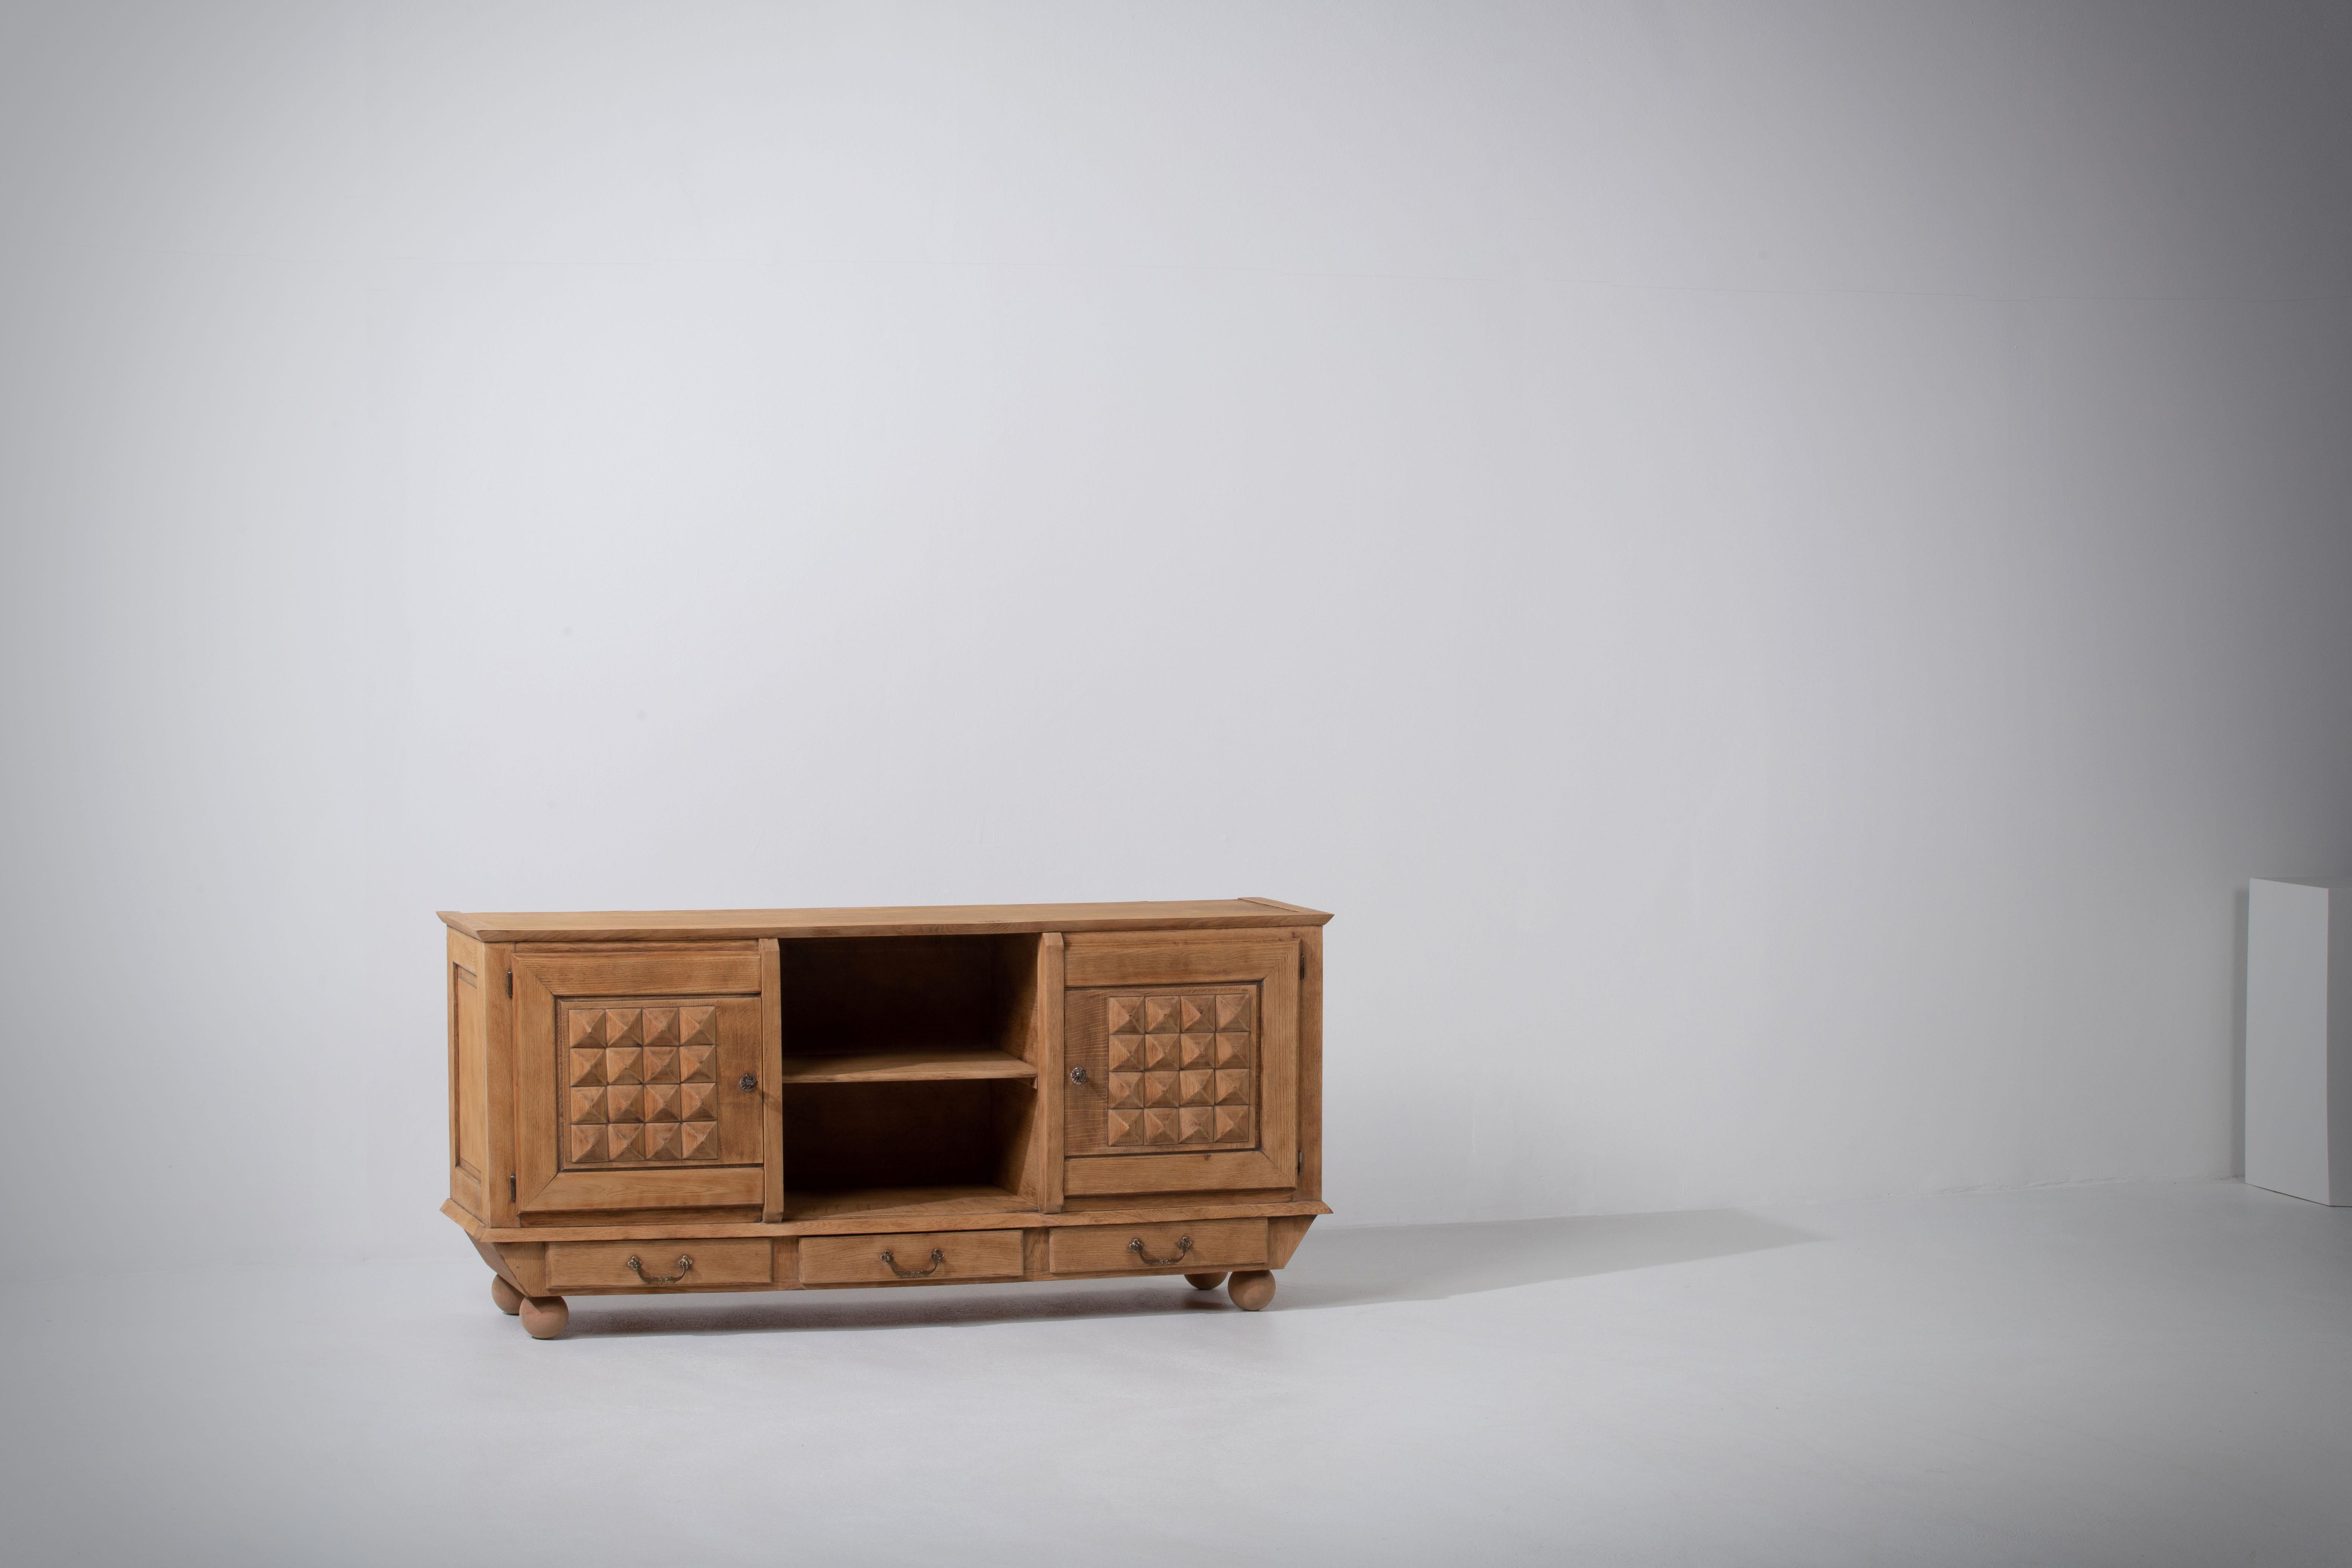 Bleached Credenza in solid oak, France, reminiscent of the work of Charles Dudouyt, 1940s.
Large Art Deco Brutalist sideboard. 
The credenza consists of two storage facilities and covered with very detailed designed doors, in the center three